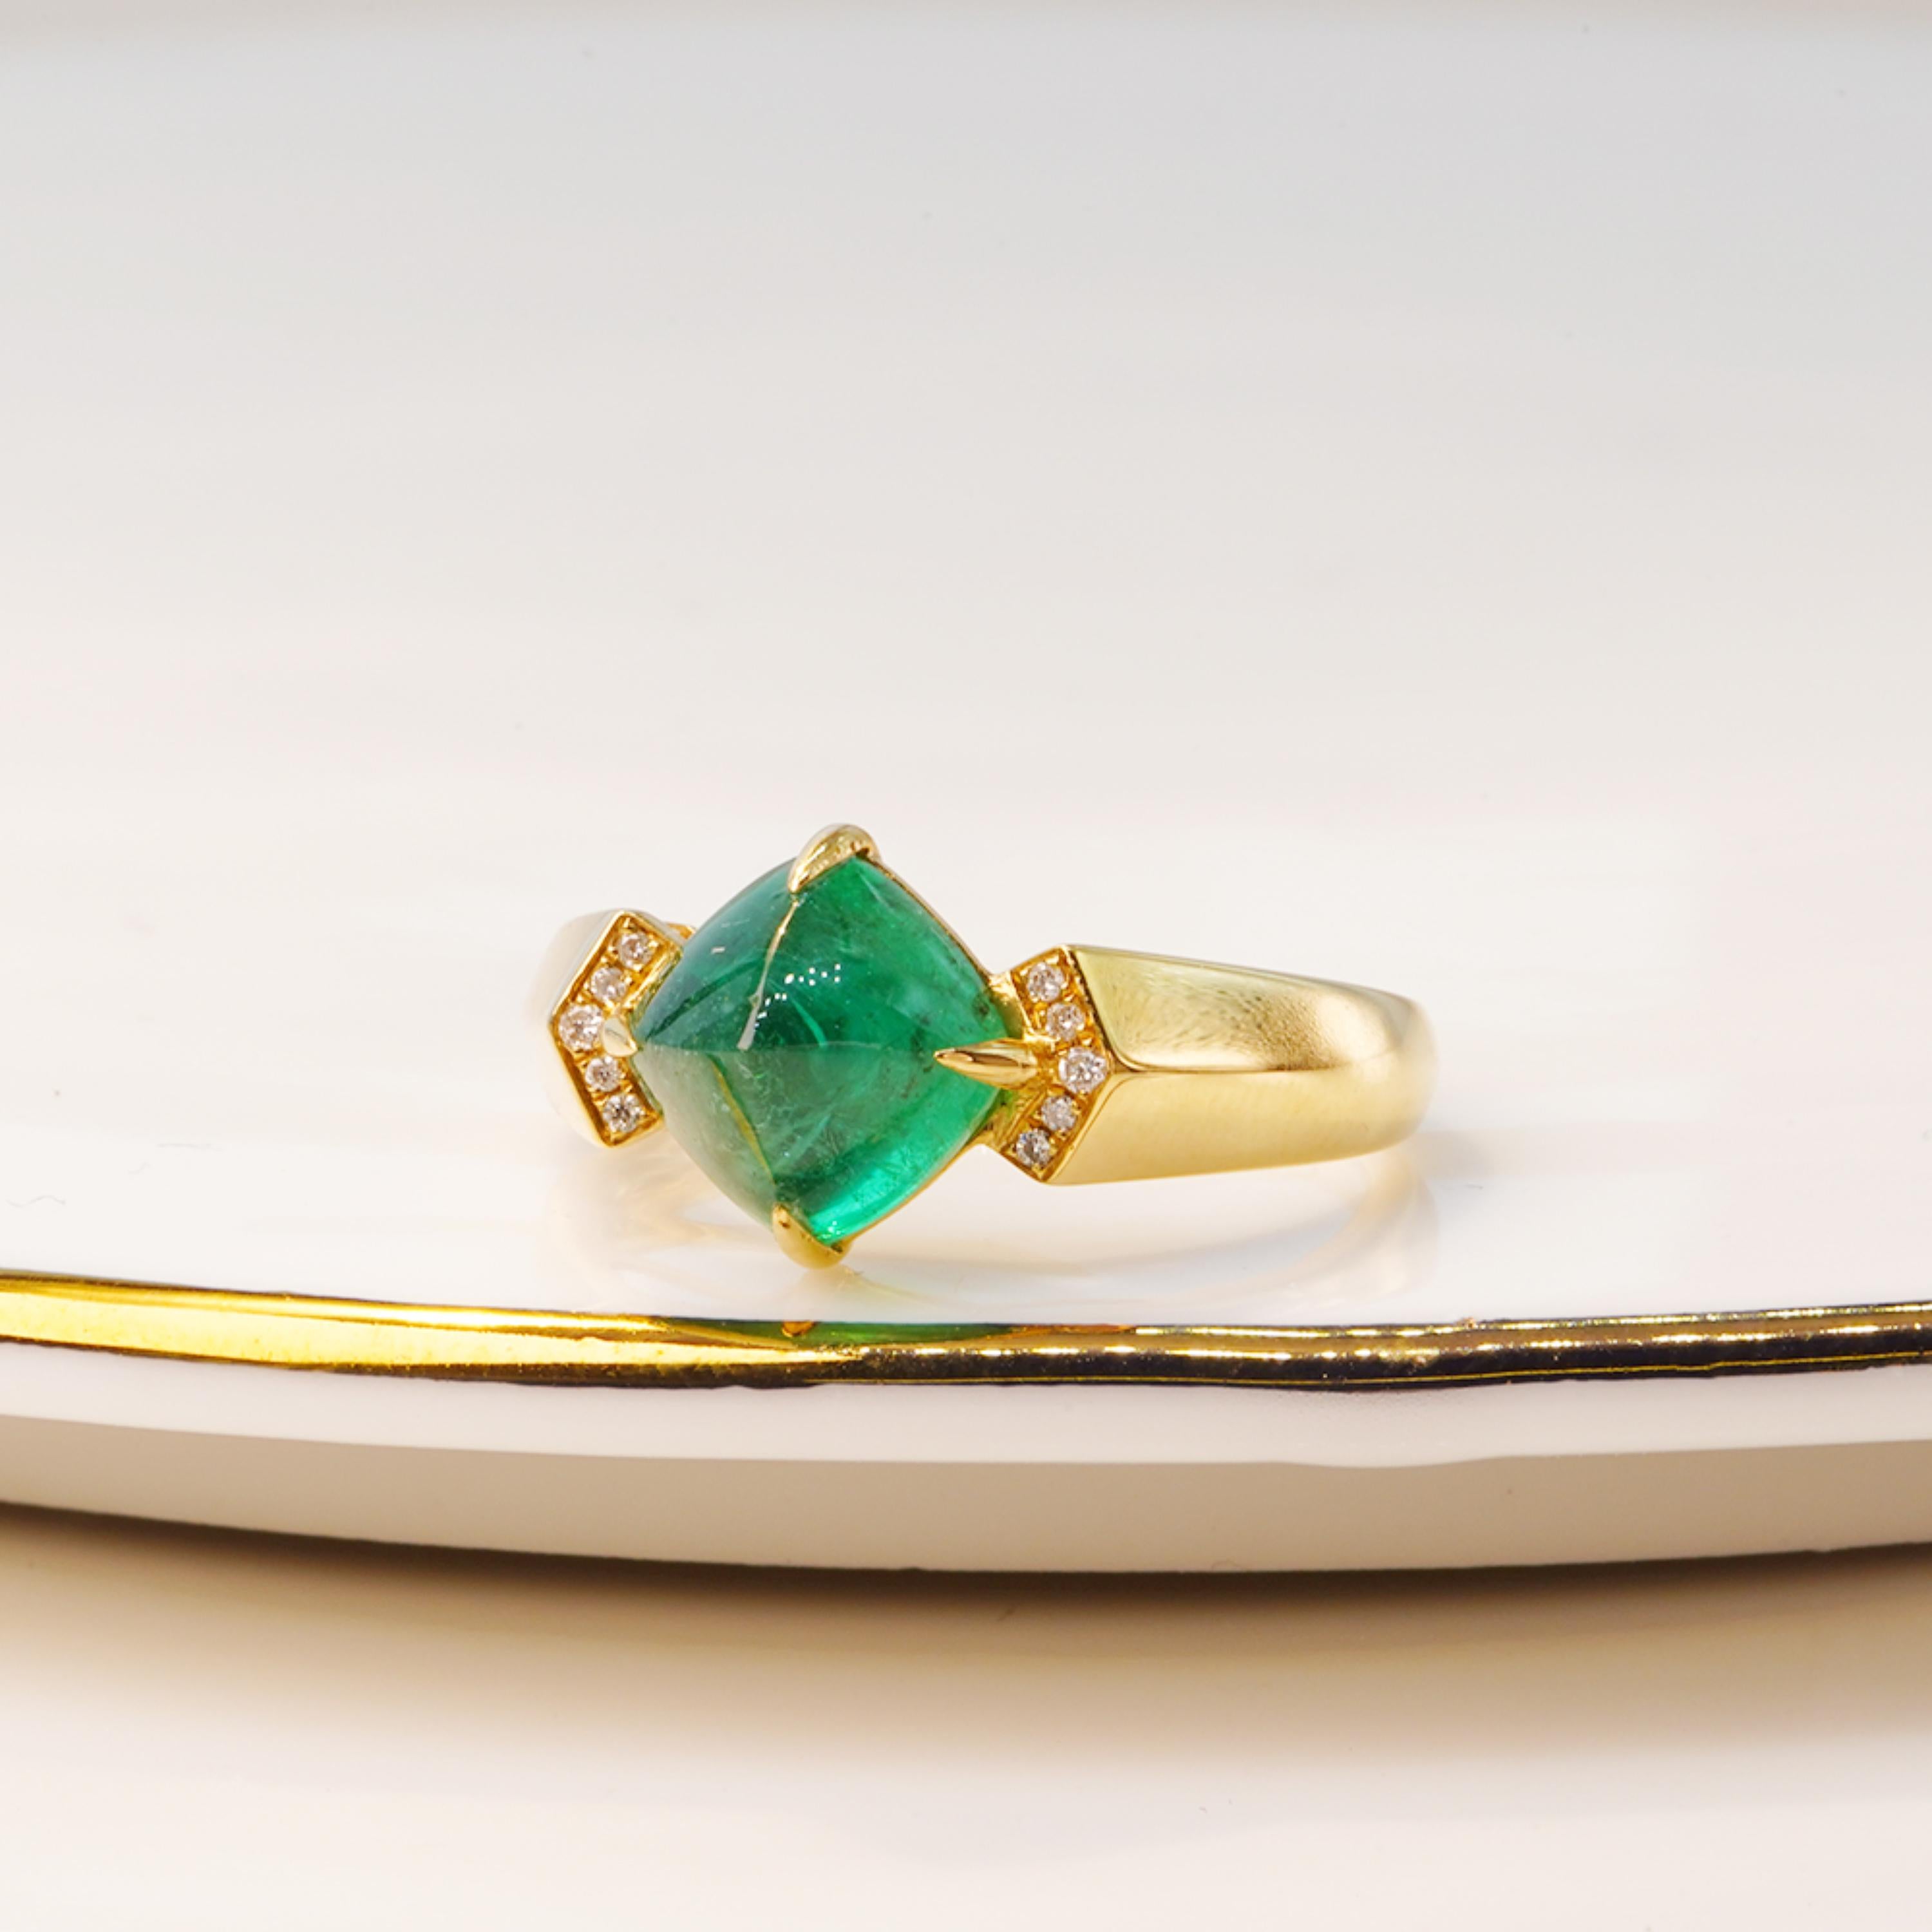 18K Gold 2 CT Natural Emerald and Diamond Antique Art Deco Style Engagement Ring

A stunning ring featuring IGI/GIA Certified 2.03 Carat Natural Emerald and 0.11 Carat of Diamond Accents set in 18K Solid Gold.

Emeralds are highly valued for their